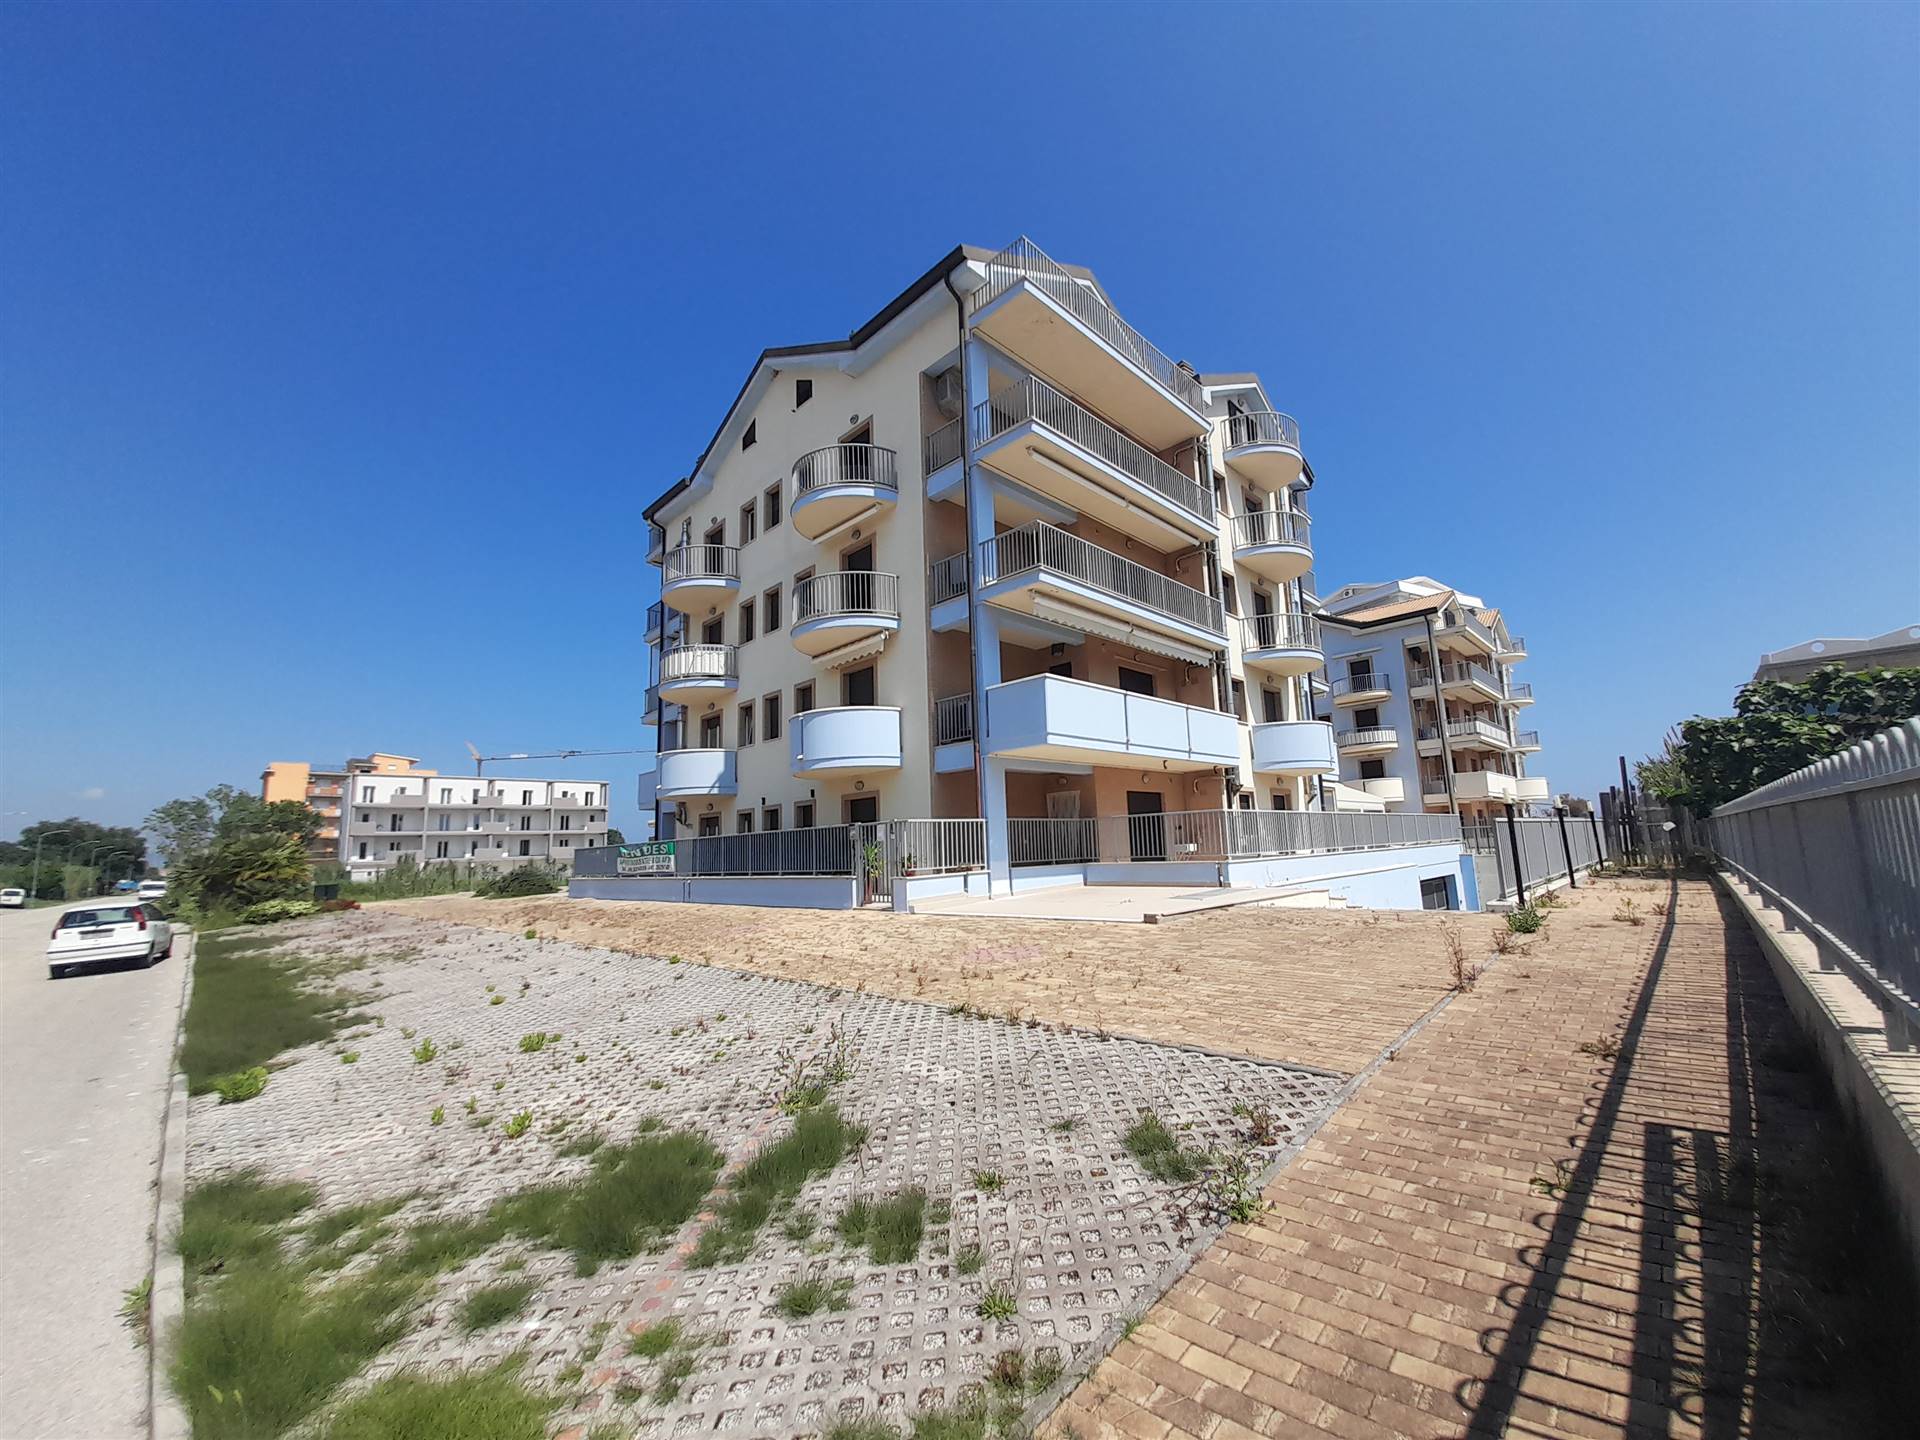 SAN SALVO MARINA, SAN SALVO, New building for sale of 50 Sq. mt., Good condition, Heating Individual heating system, Energetic class: C, Epi: 1 